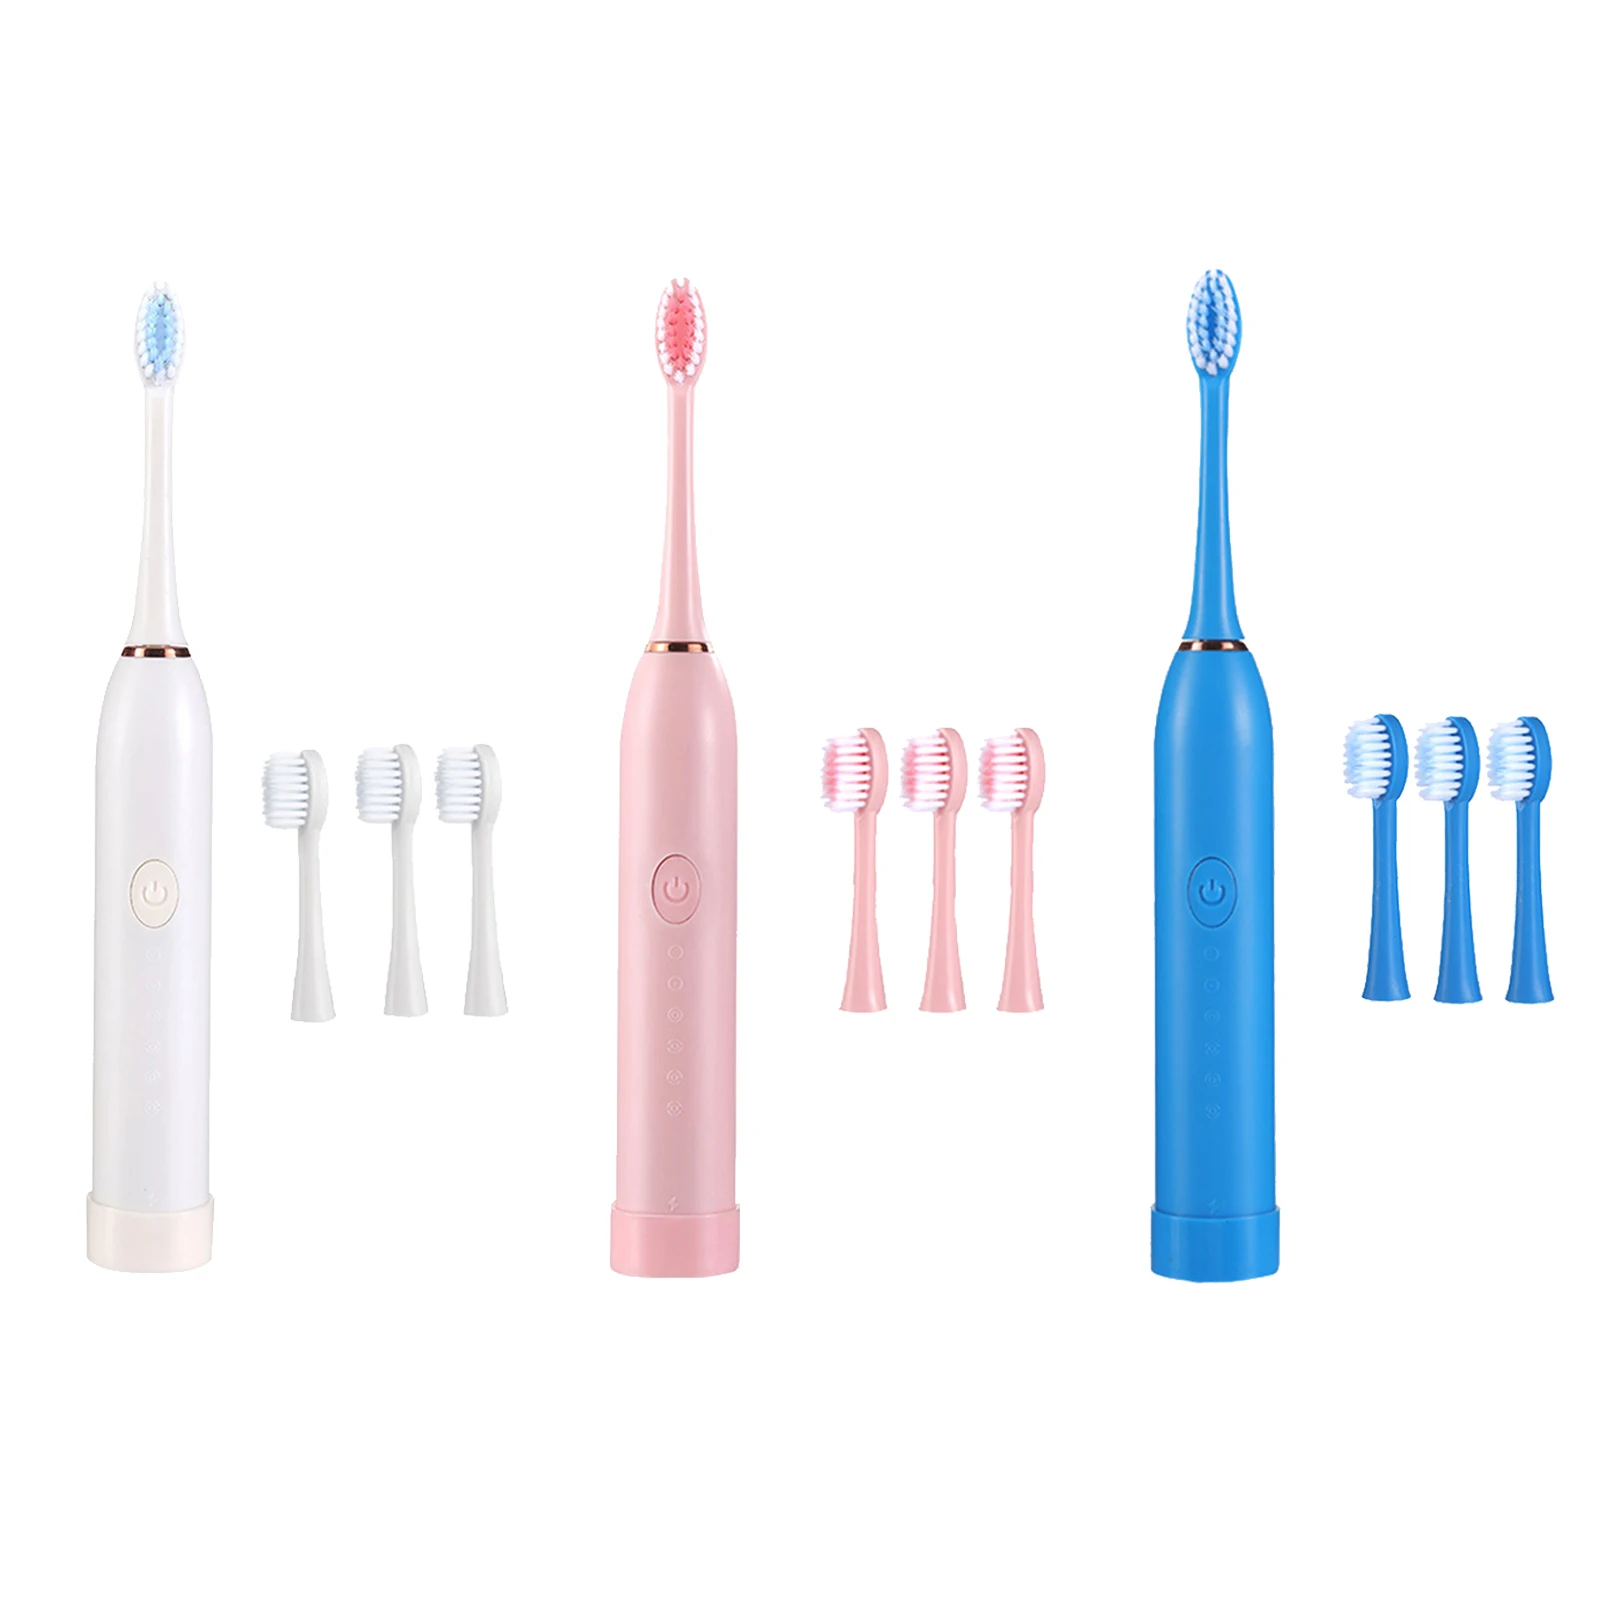 USB Charging Ultrasonic Electric Toothbrush Automatic Intelligent Timing, Sonic Vibration Zone Change Reminder